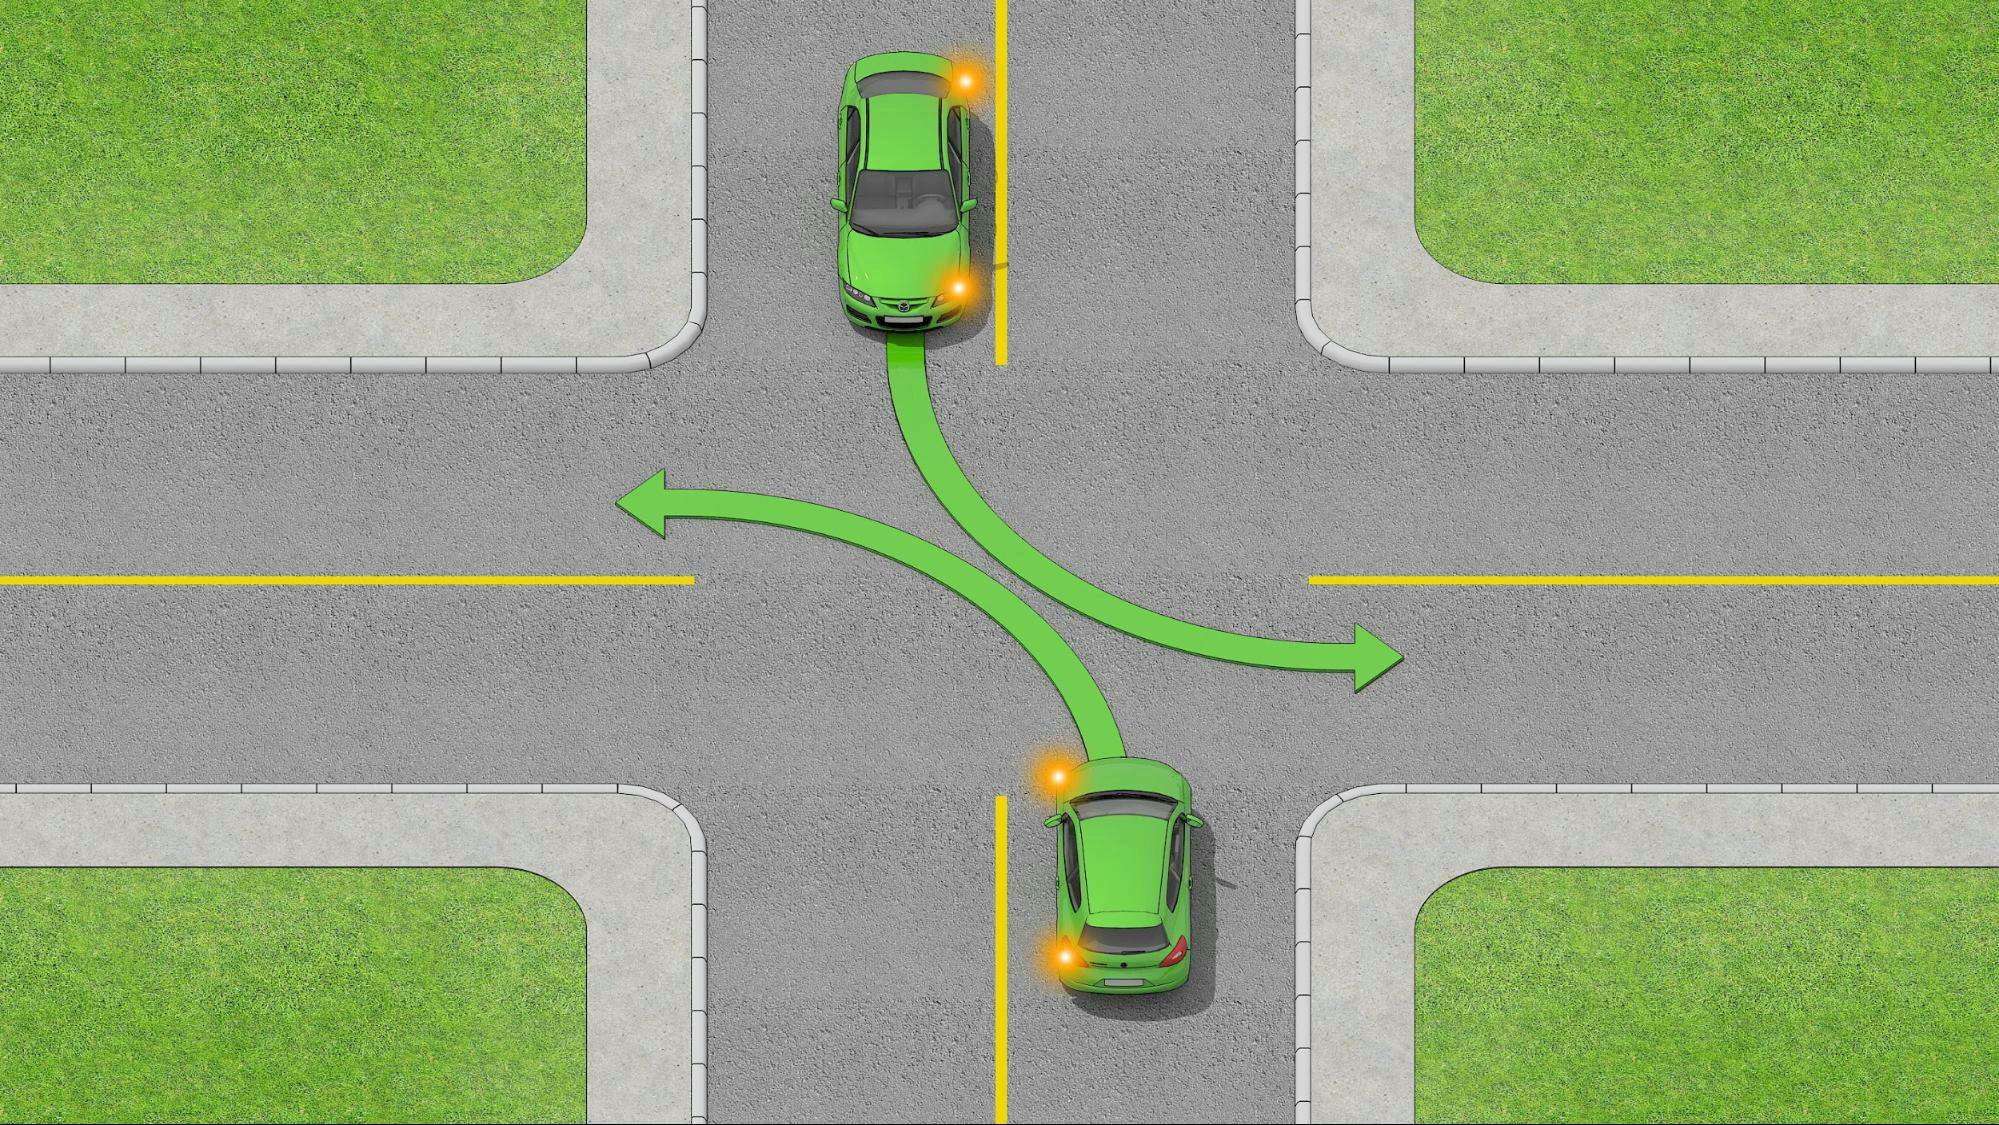 2 oncoming cars at an uncontrolled intersection